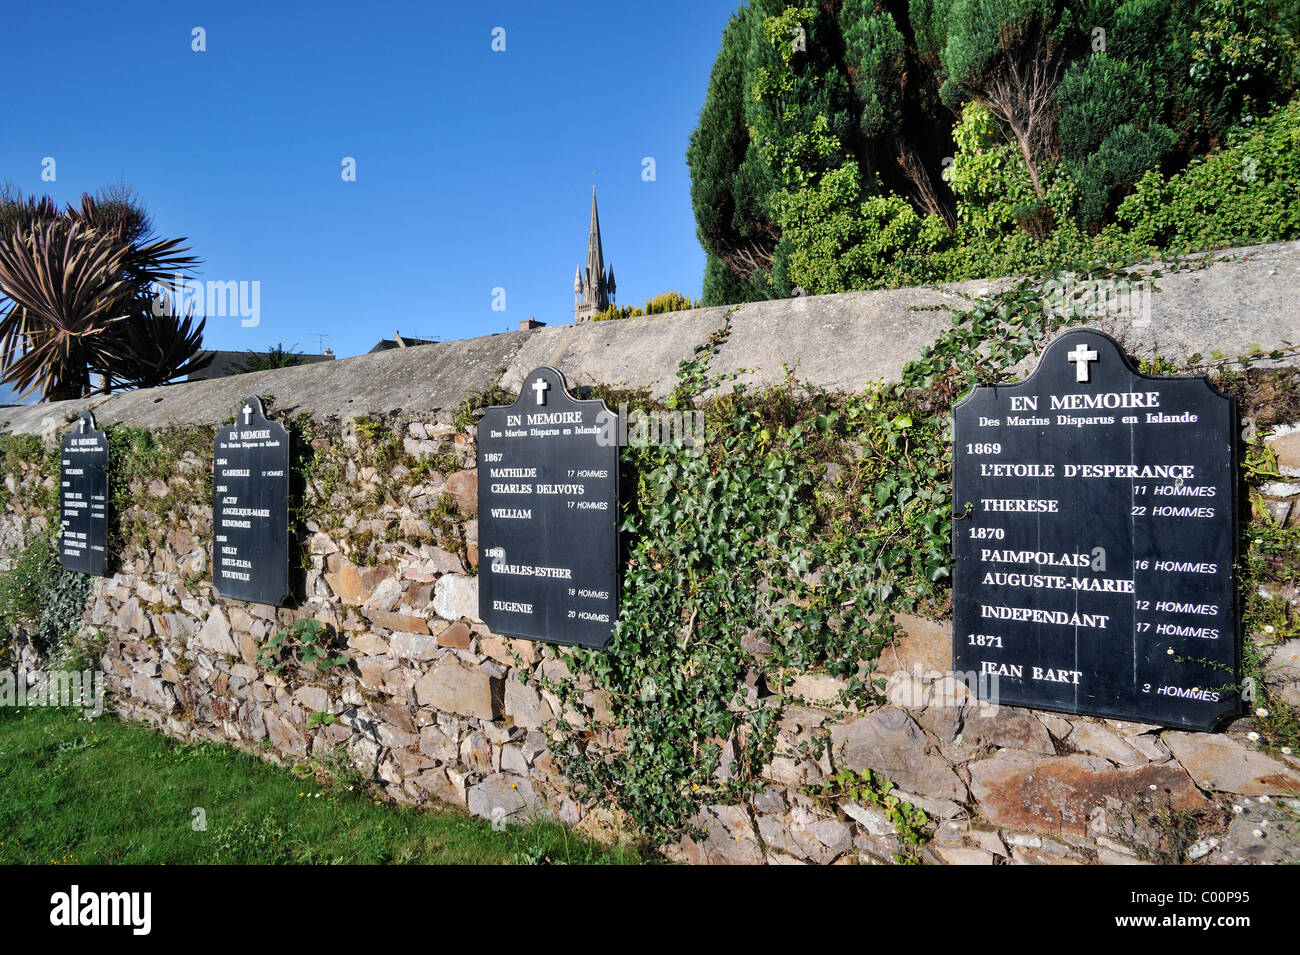 Mur des Disparus / Wall of the Departed at the Ploubazlanec cemetery remembering sailors, Côtes-d'Armor, Brittany, France Stock Photo